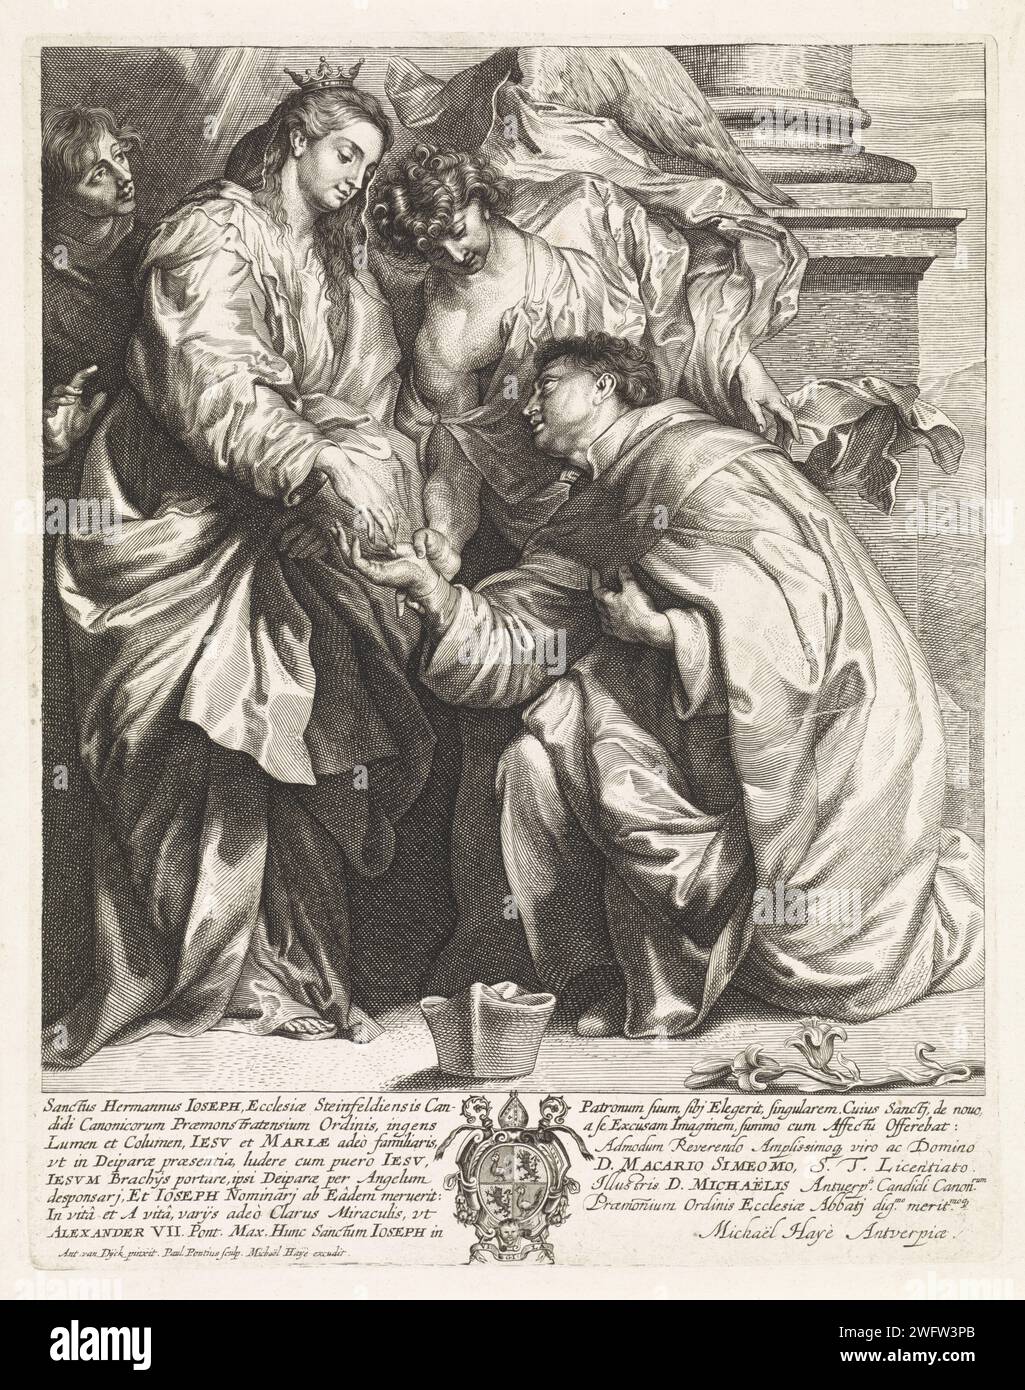 Visioen by H. Hermann Joseph (version B), Paulus Pontius, After Anthony Van Dyck, 1616 - 1657 print The crowned Virgin Mary appears on Saint Hermann Joseph van Steinfeld. She is flanked by two angels. In the foreground the Biretta of the Saint and his attribute de Roos. In the margin a coat of arms and a caption, in two columns, in Latin. Antwerp paper engraving appearances of Mary. the Praemonstratense friar Herman Joseph of Steinfeld; possible attributes of St. Herman Joseph: book, branch of roses, cup (with roses), infant Christ, key, knife. head-gear. armorial bearing, heraldry Stock Photo